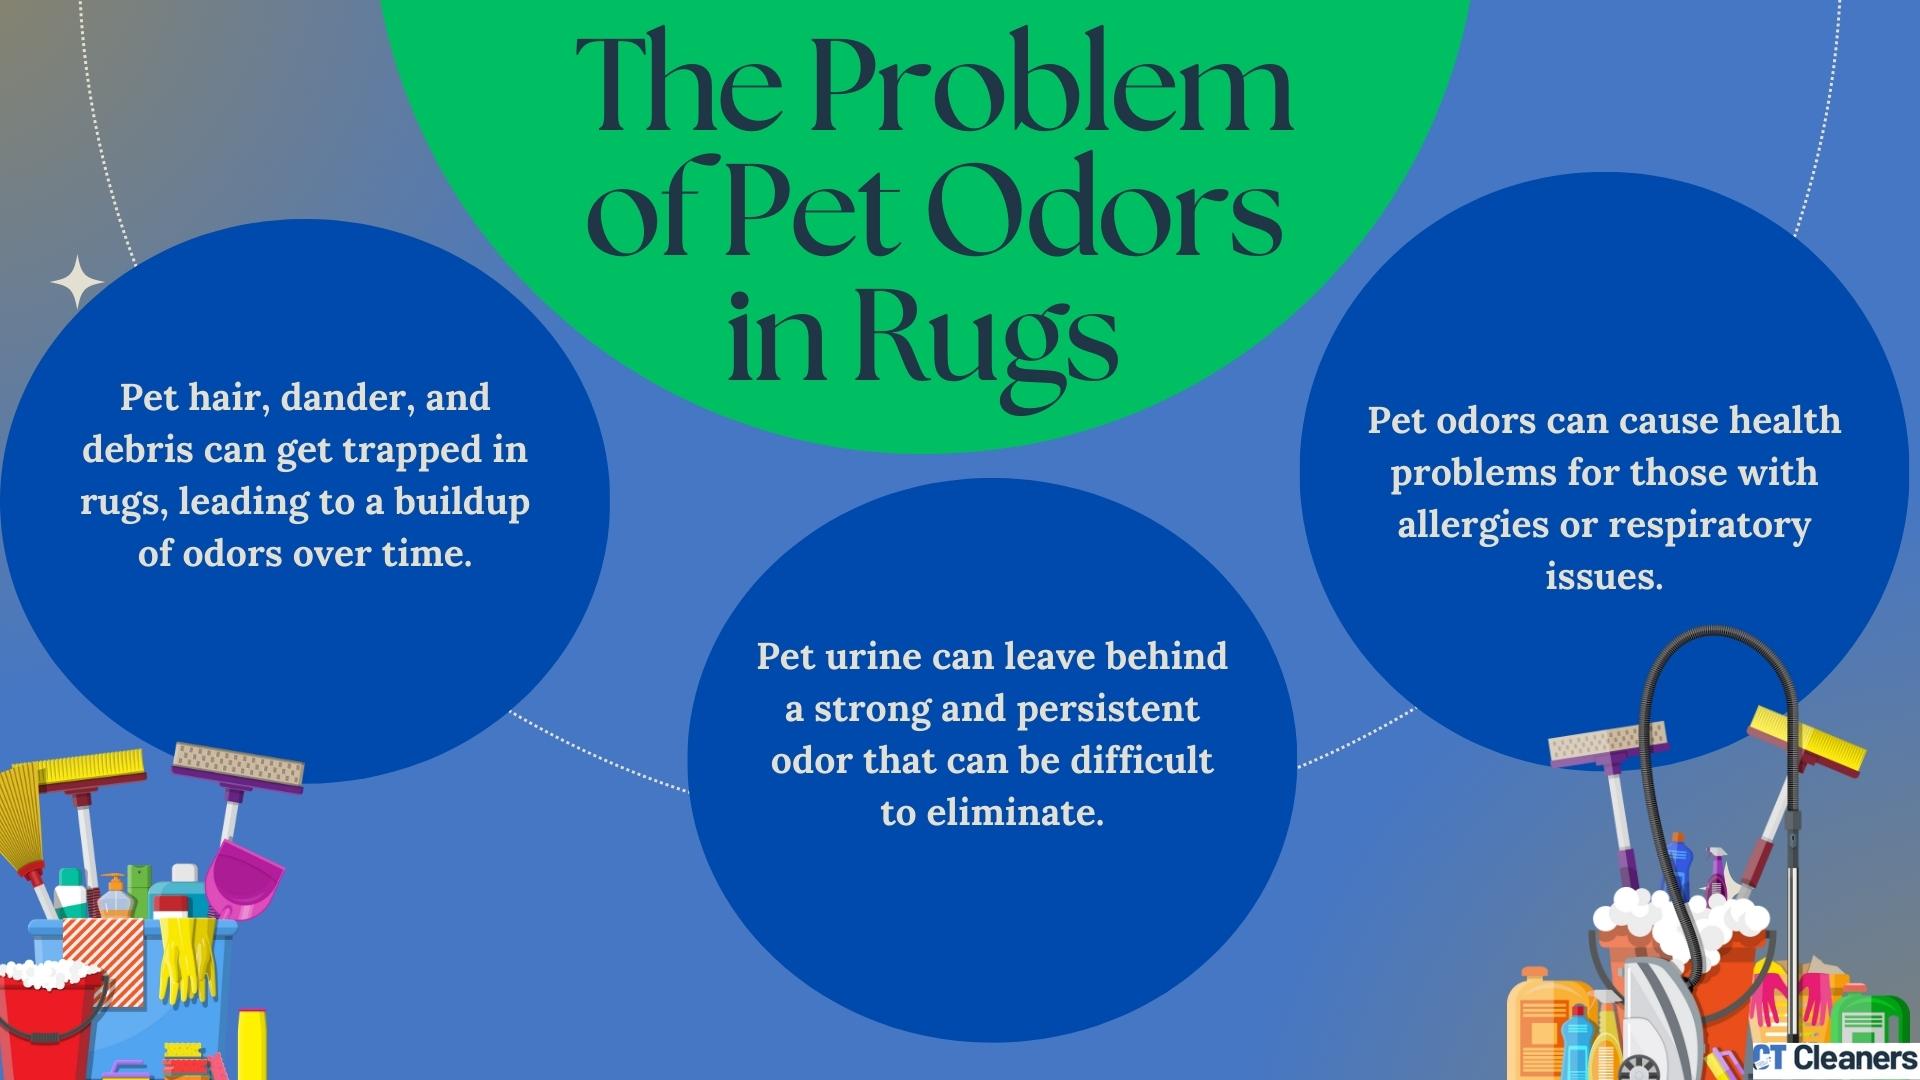 The Problem of Pet Odors in Rugs